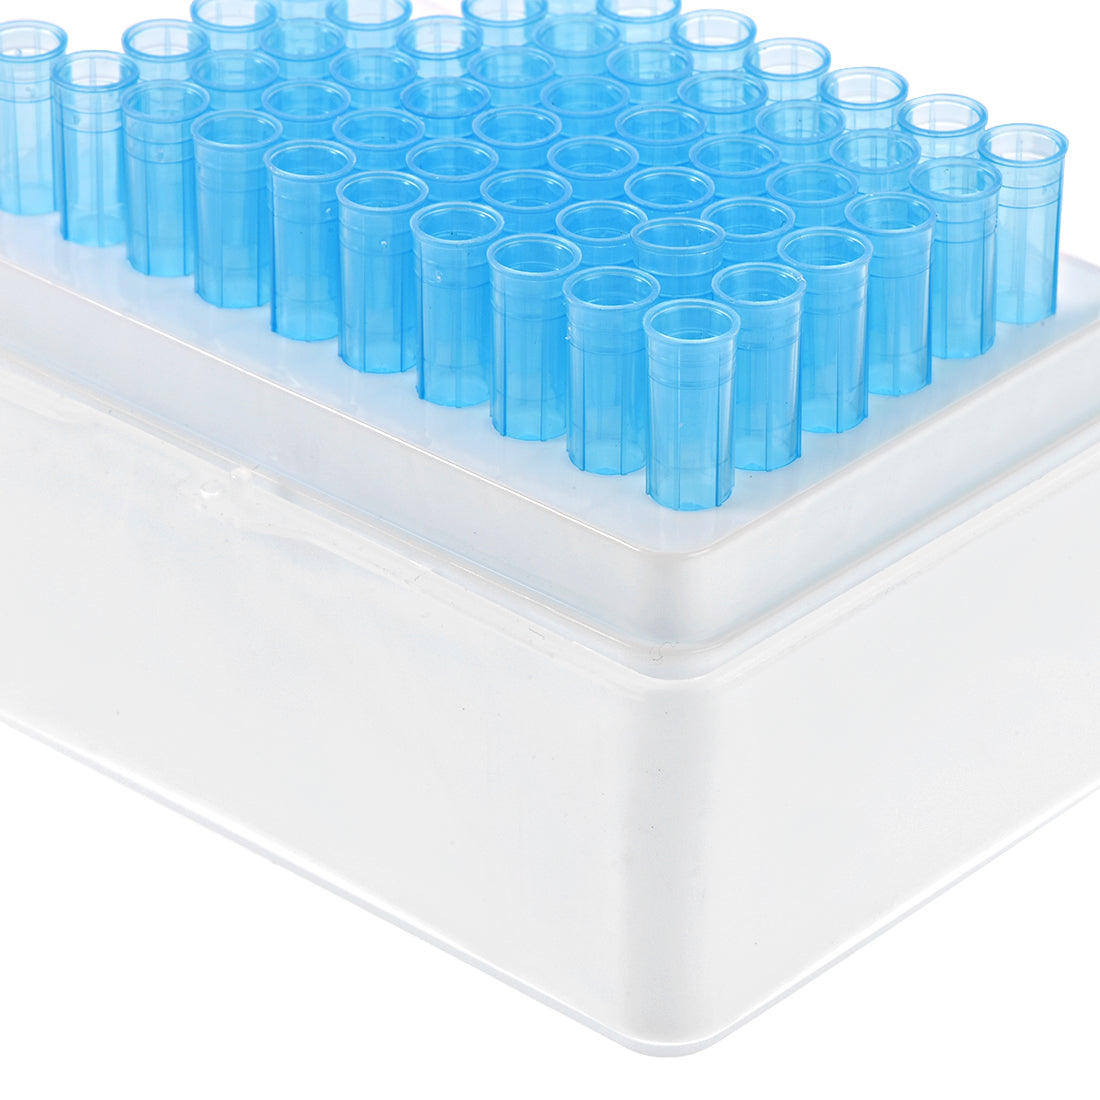 uxcell Uxcell Pipette Tips Box 60-Well Polypropylene Tip Holder Container for 1ml/1000ul Pipettor 8mm Hole Diameter 2Pcs